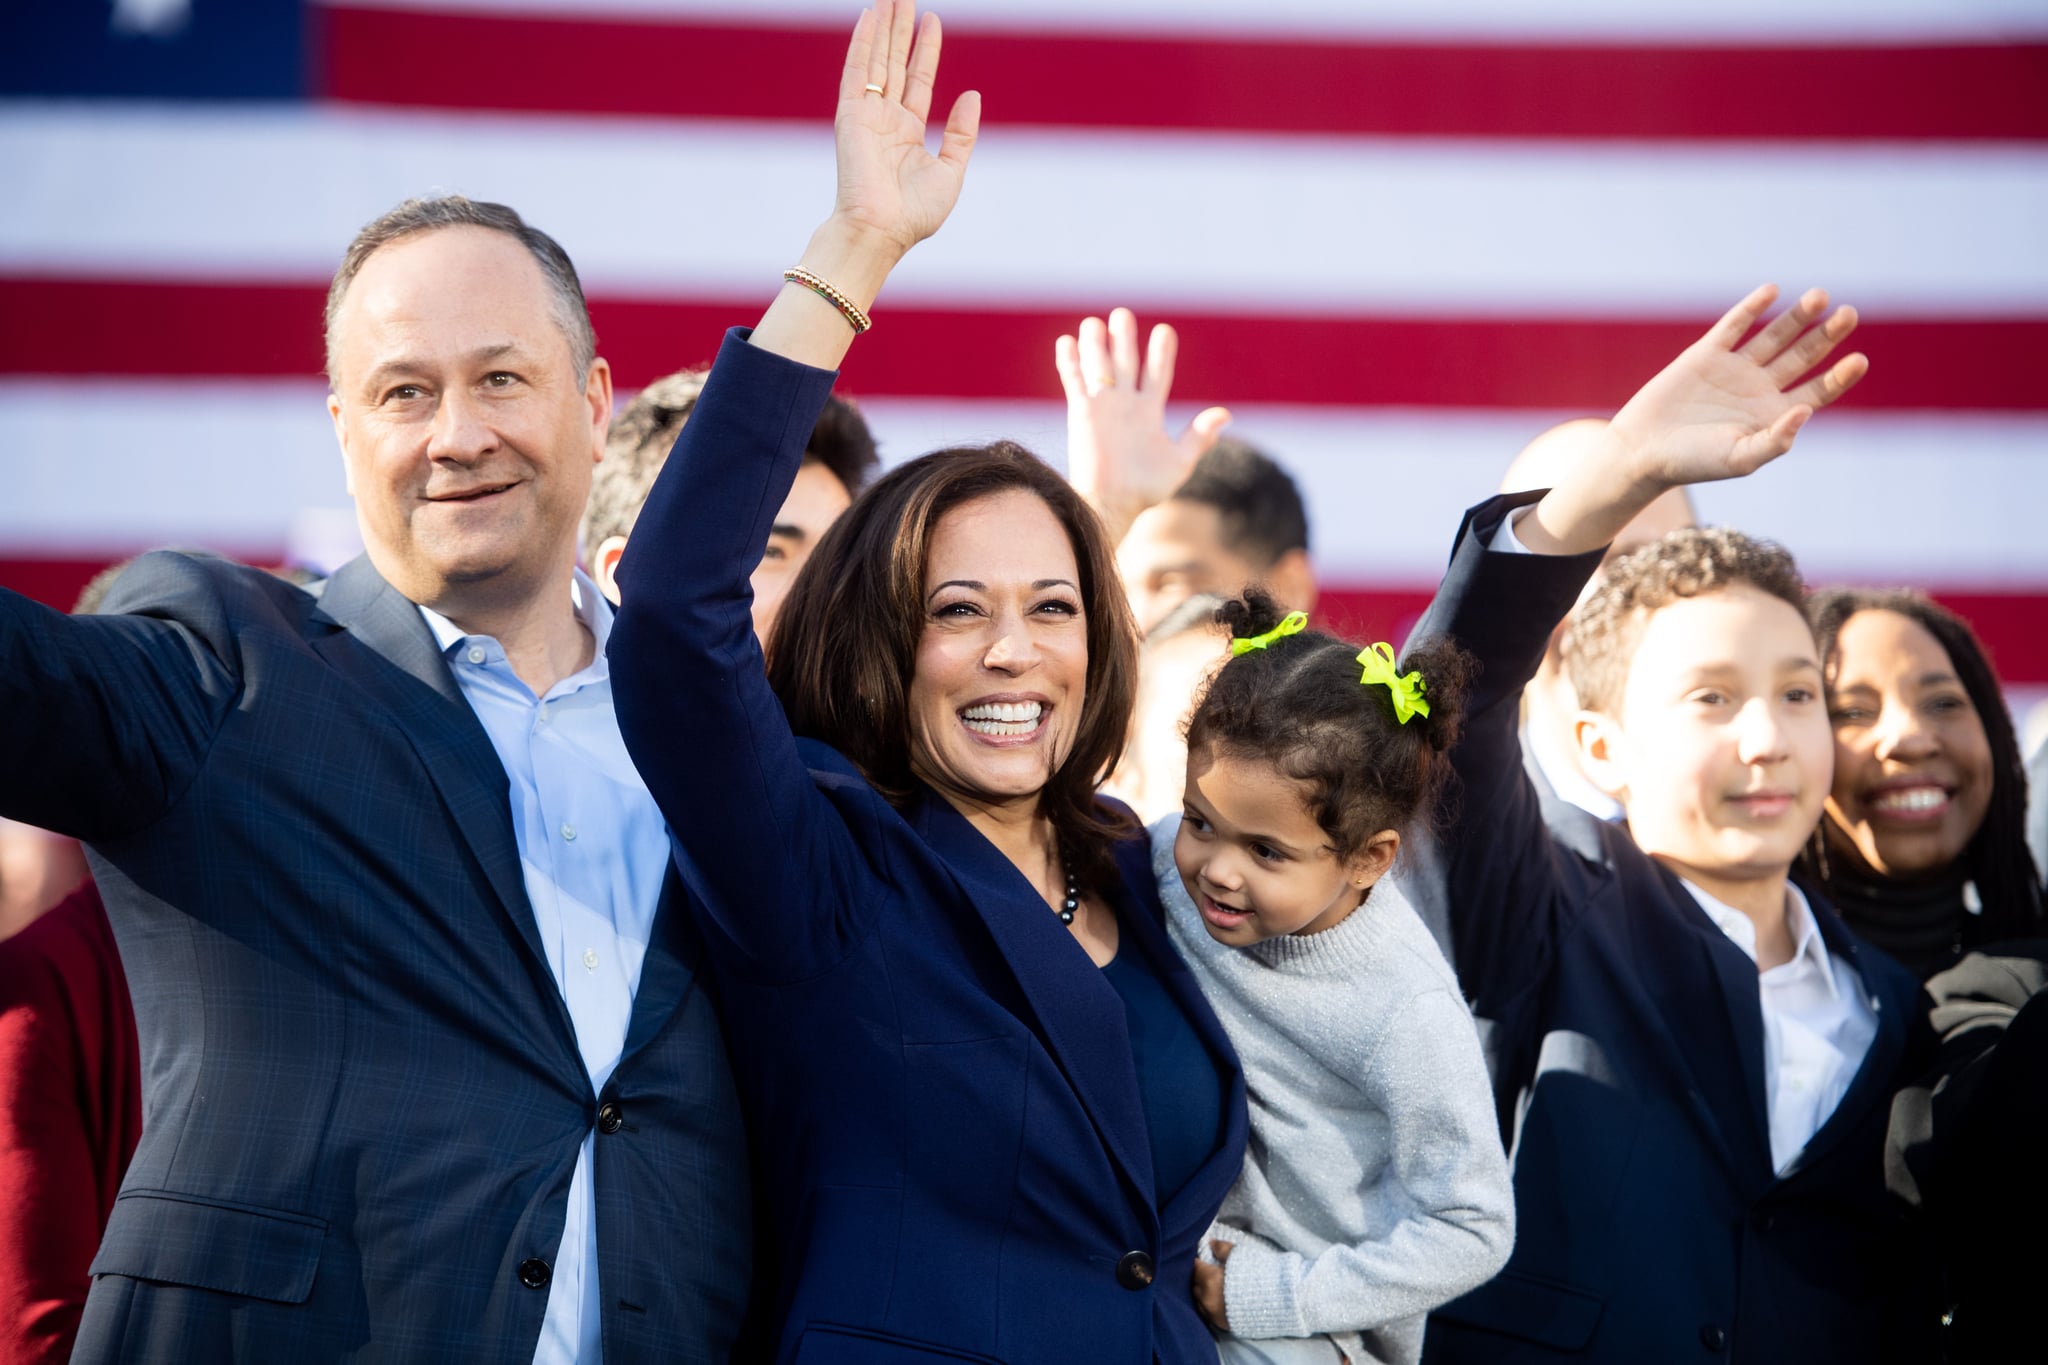 California Senator Kamala Harris waves next to her husband  Douglas Emhoff (L) during a rally launching her presidential campaign on January 27, 2019 in Oakland, California. (Photo by NOAH BERGER / AFP)        (Photo credit should read NOAH BERGER/AFP/Getty Images)